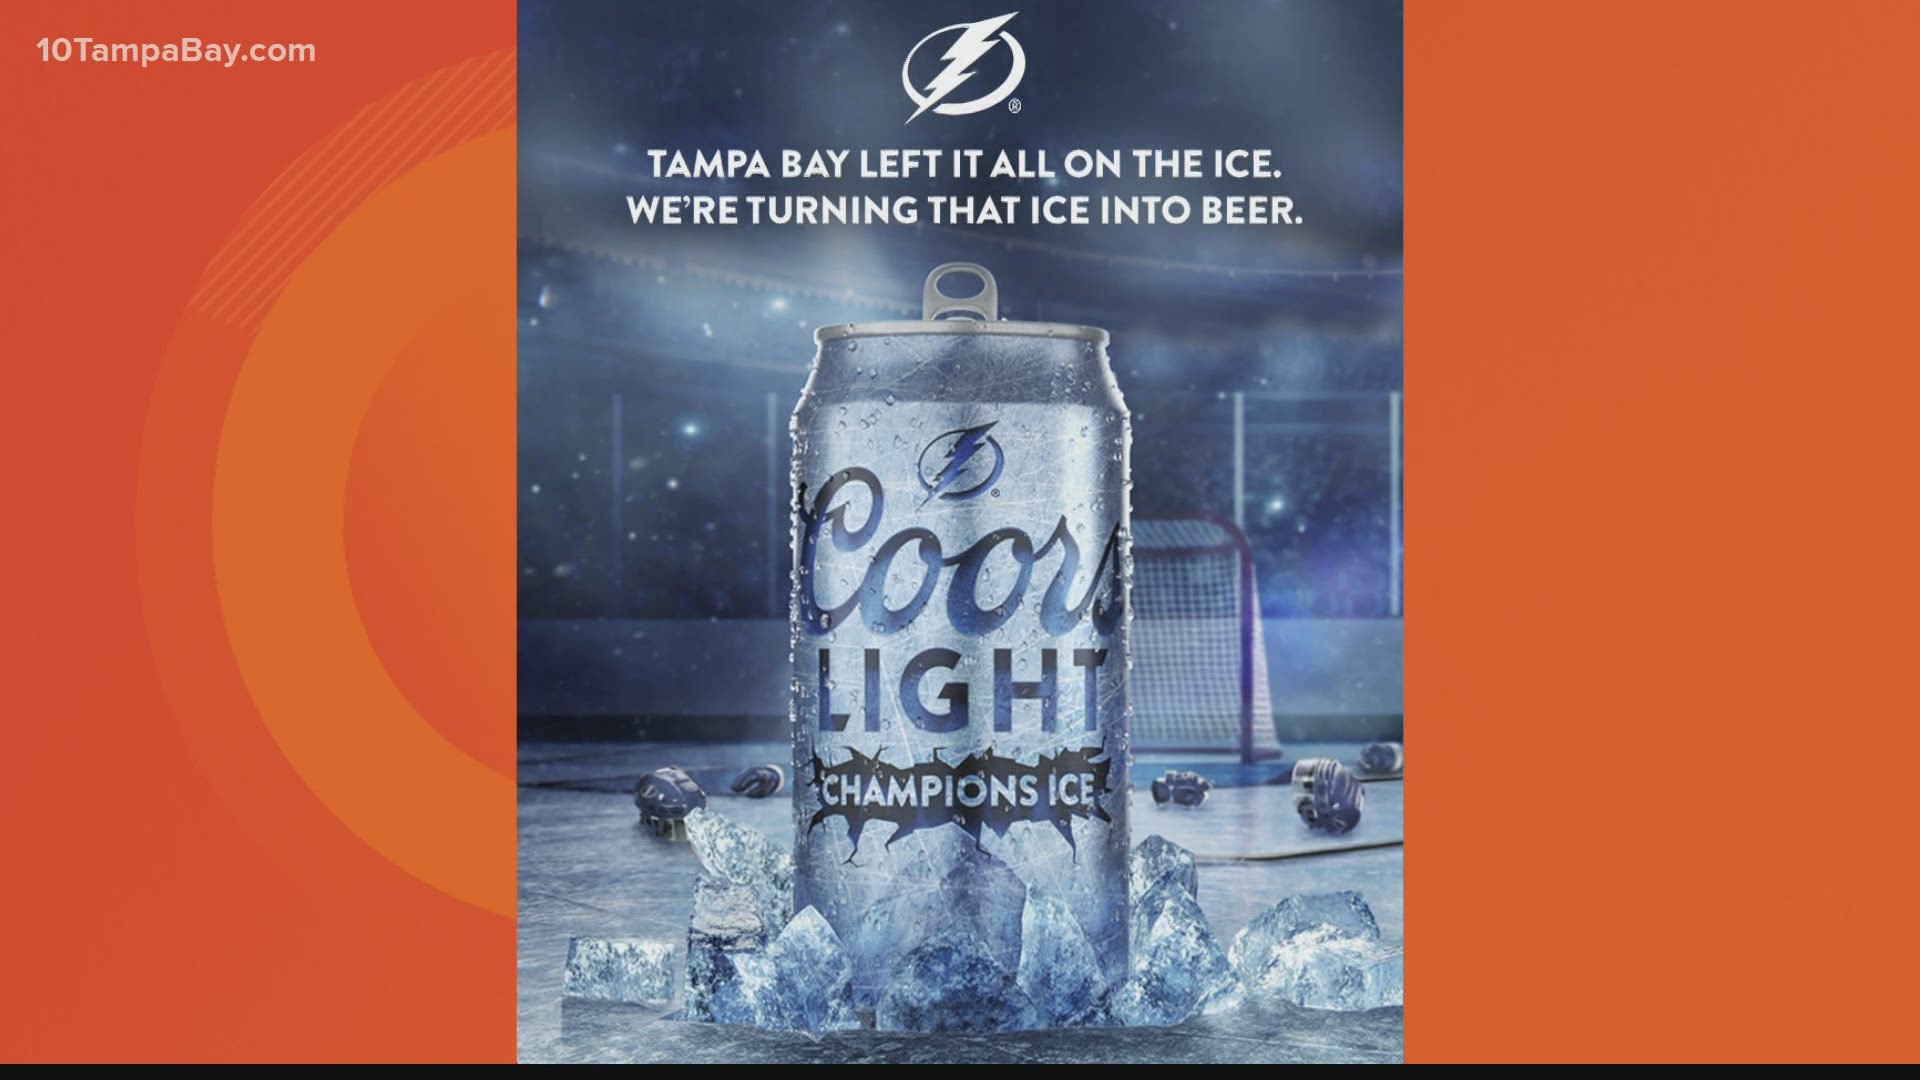 "Champions Ice" beer will be available on tap in Tampa area bars starting next Monday.